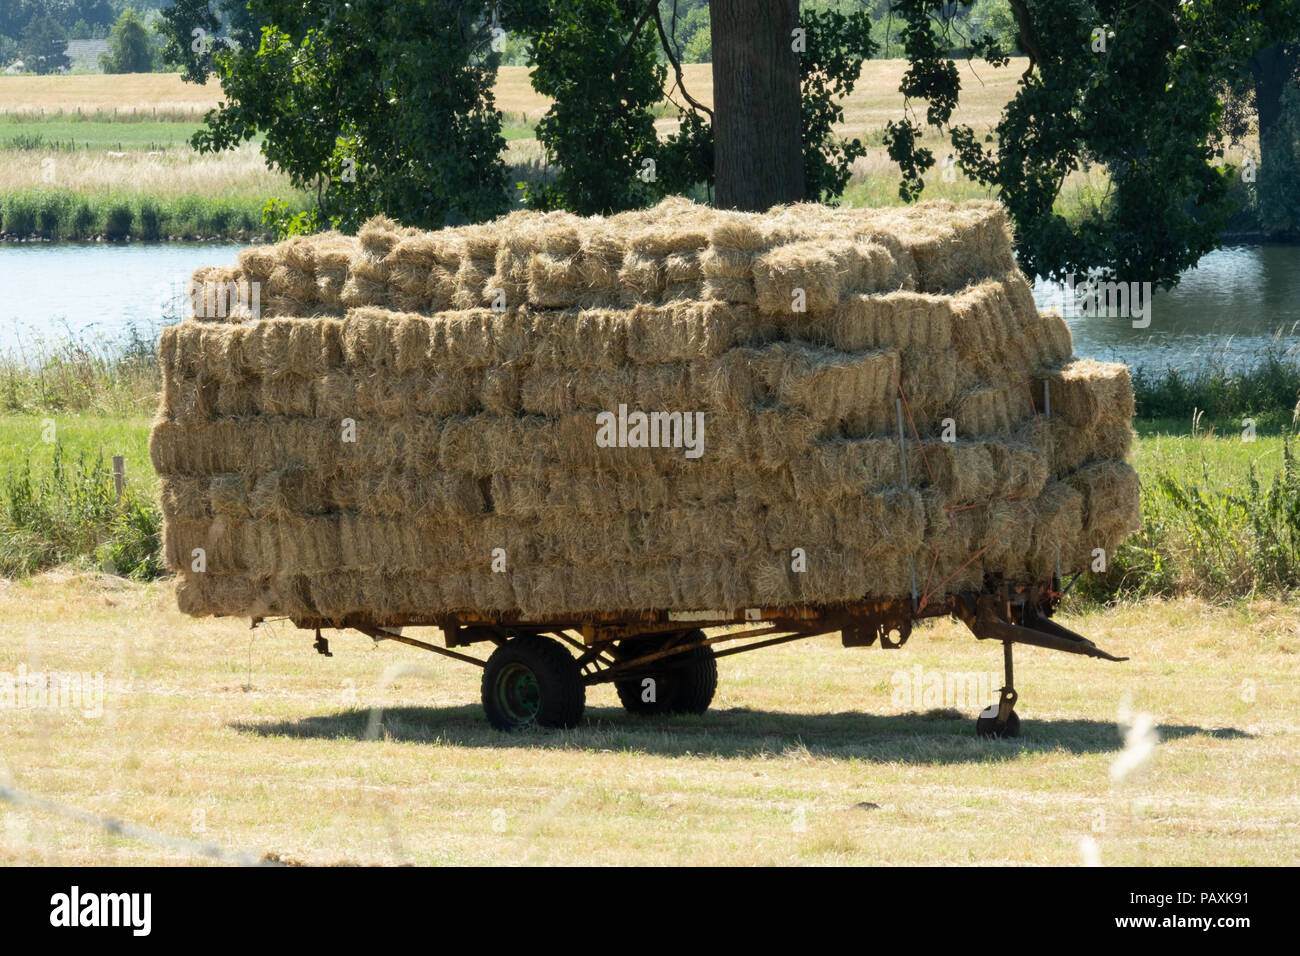 trailer loaded with gold yellow straw bales is ready for transport in the field Stock Photo